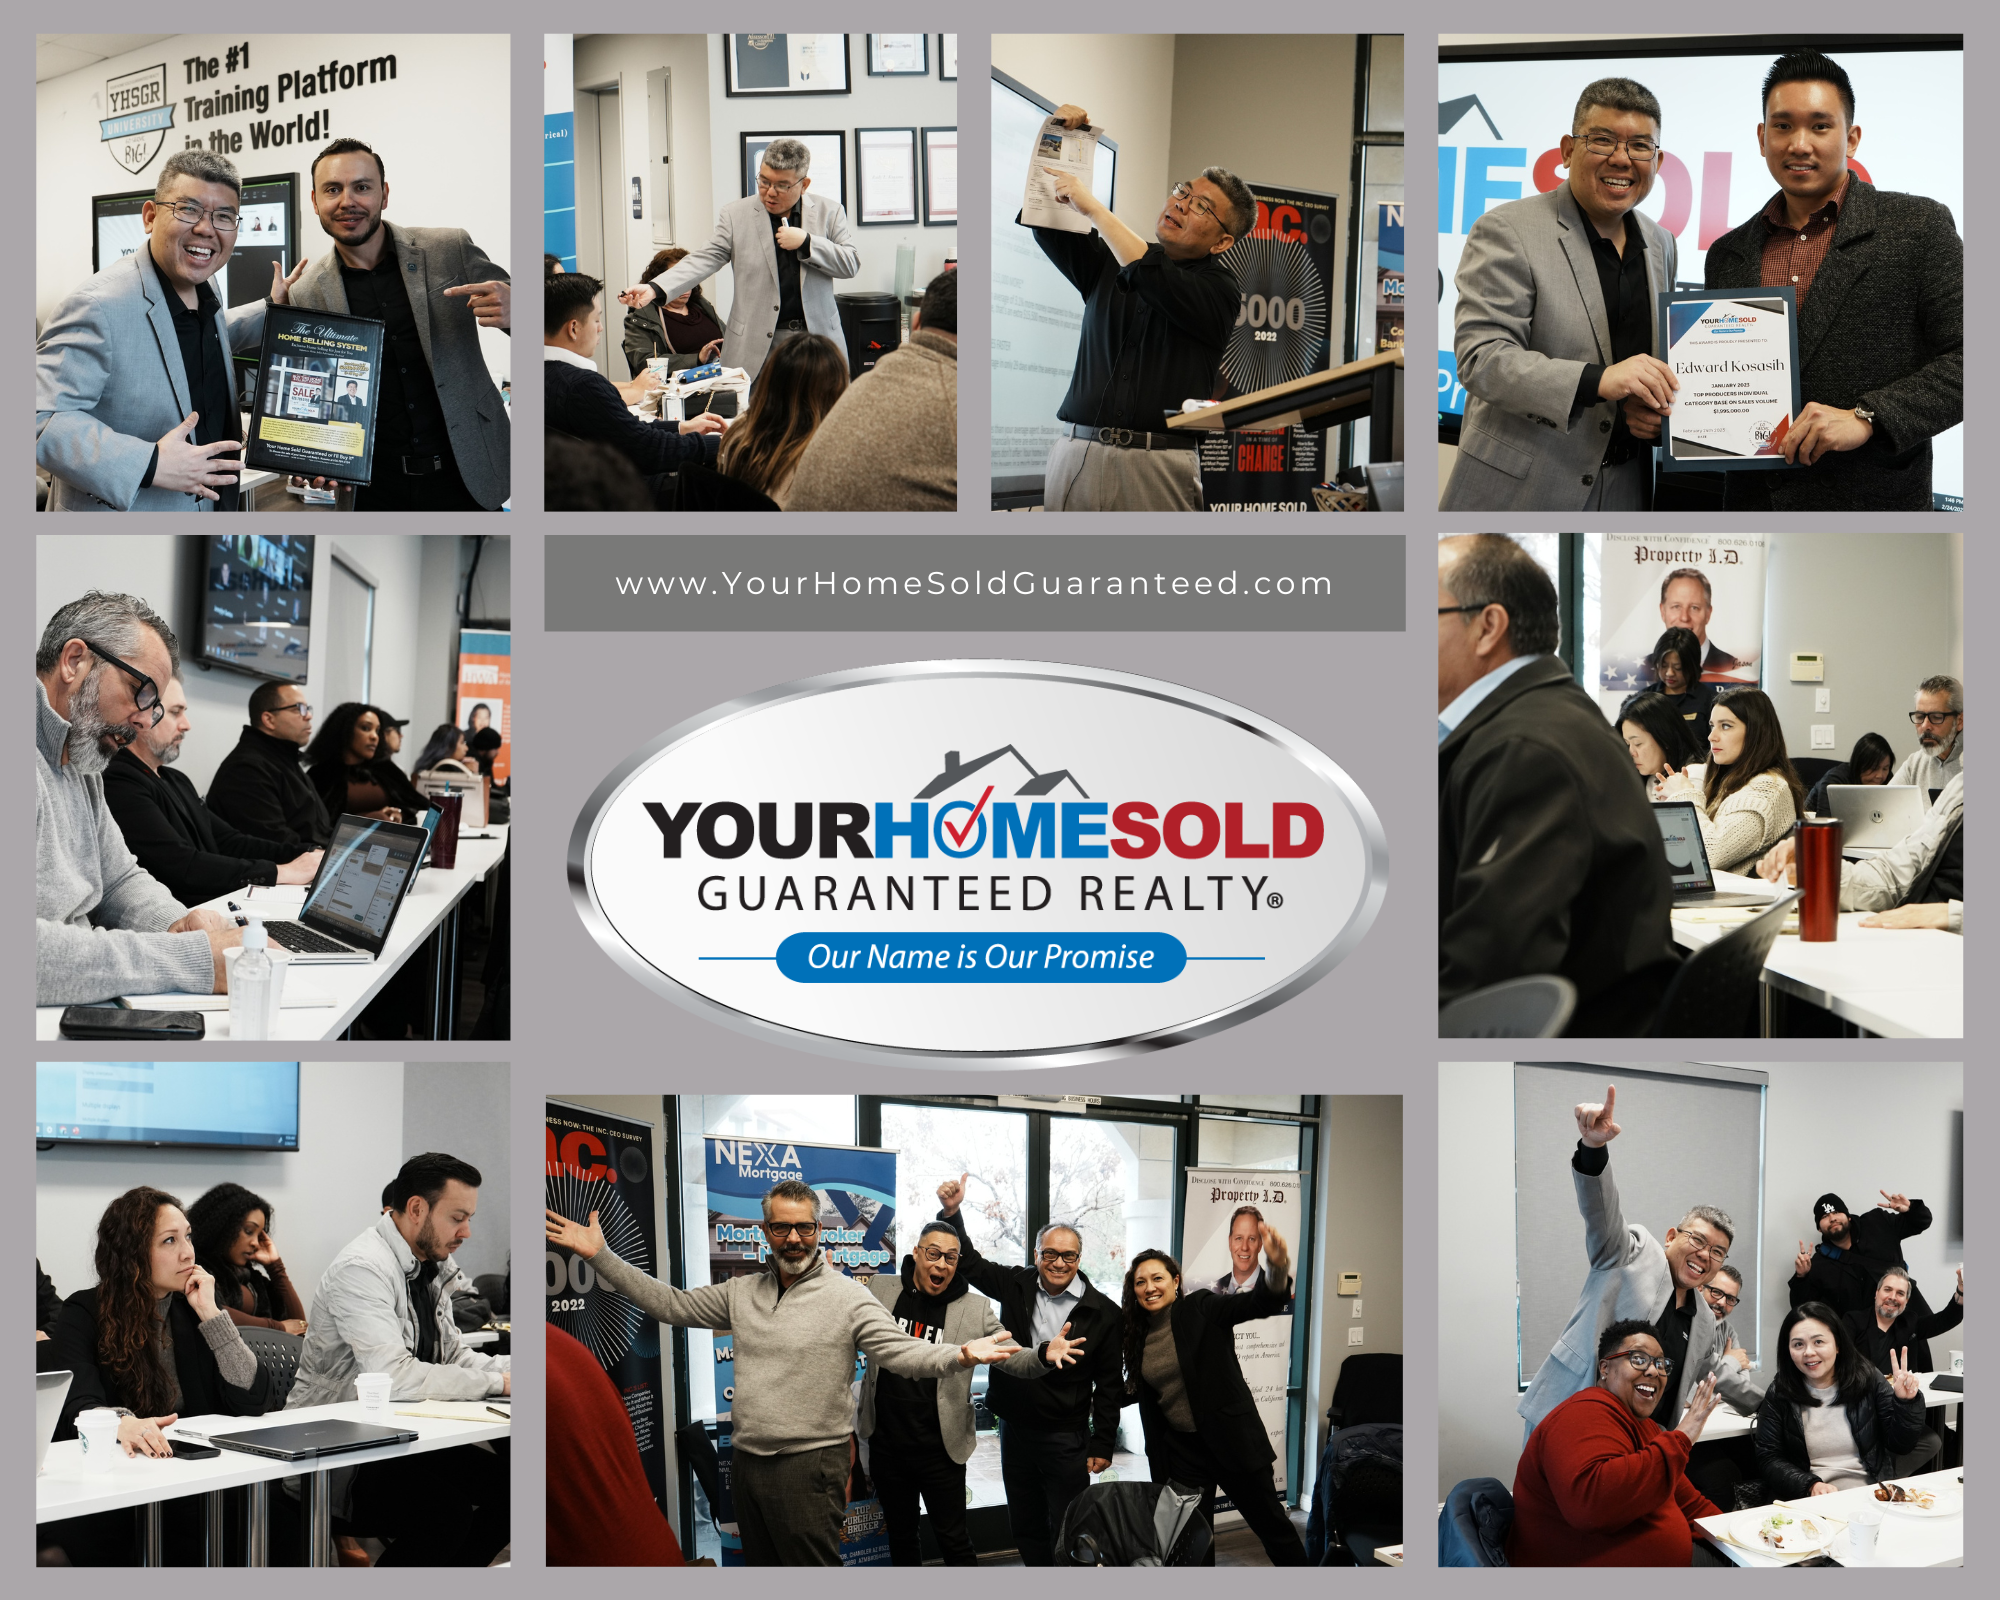 Your Home Sold Guaranteed Realty Held Its Q1 2023 Real Estate Agents Marketing Workshop On February 25, 2023